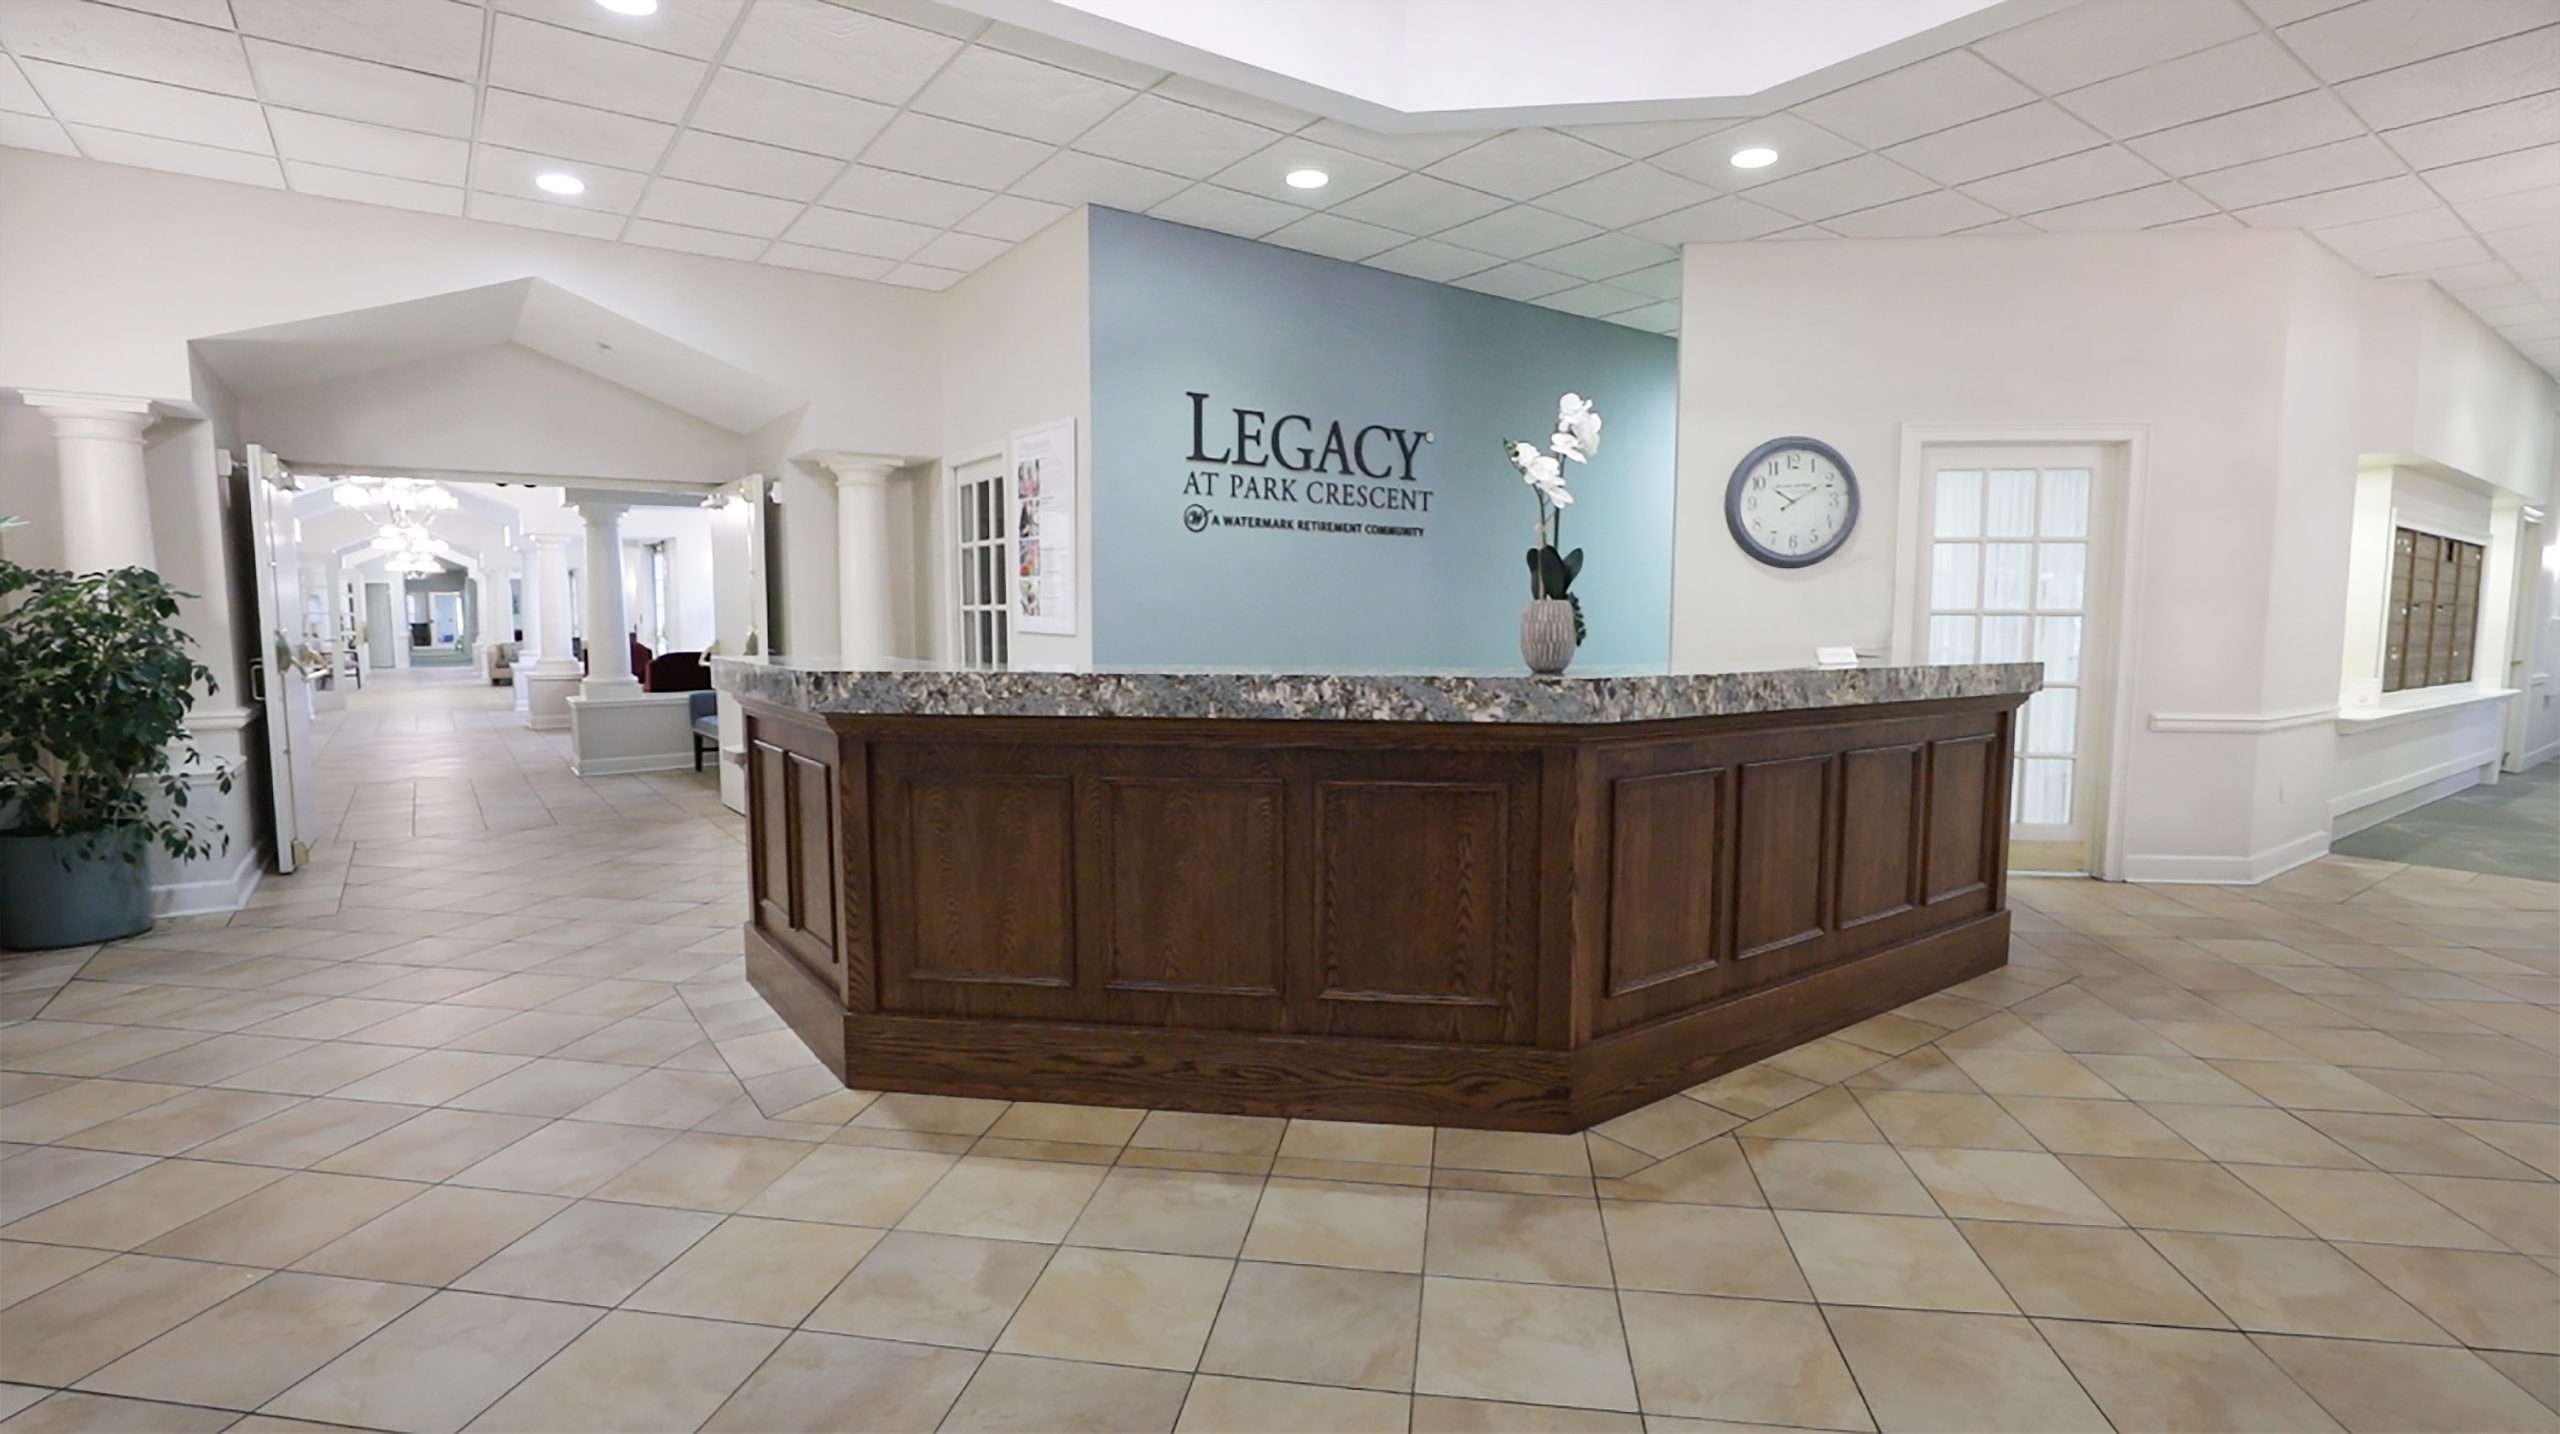 Legacy at Park Crescent image